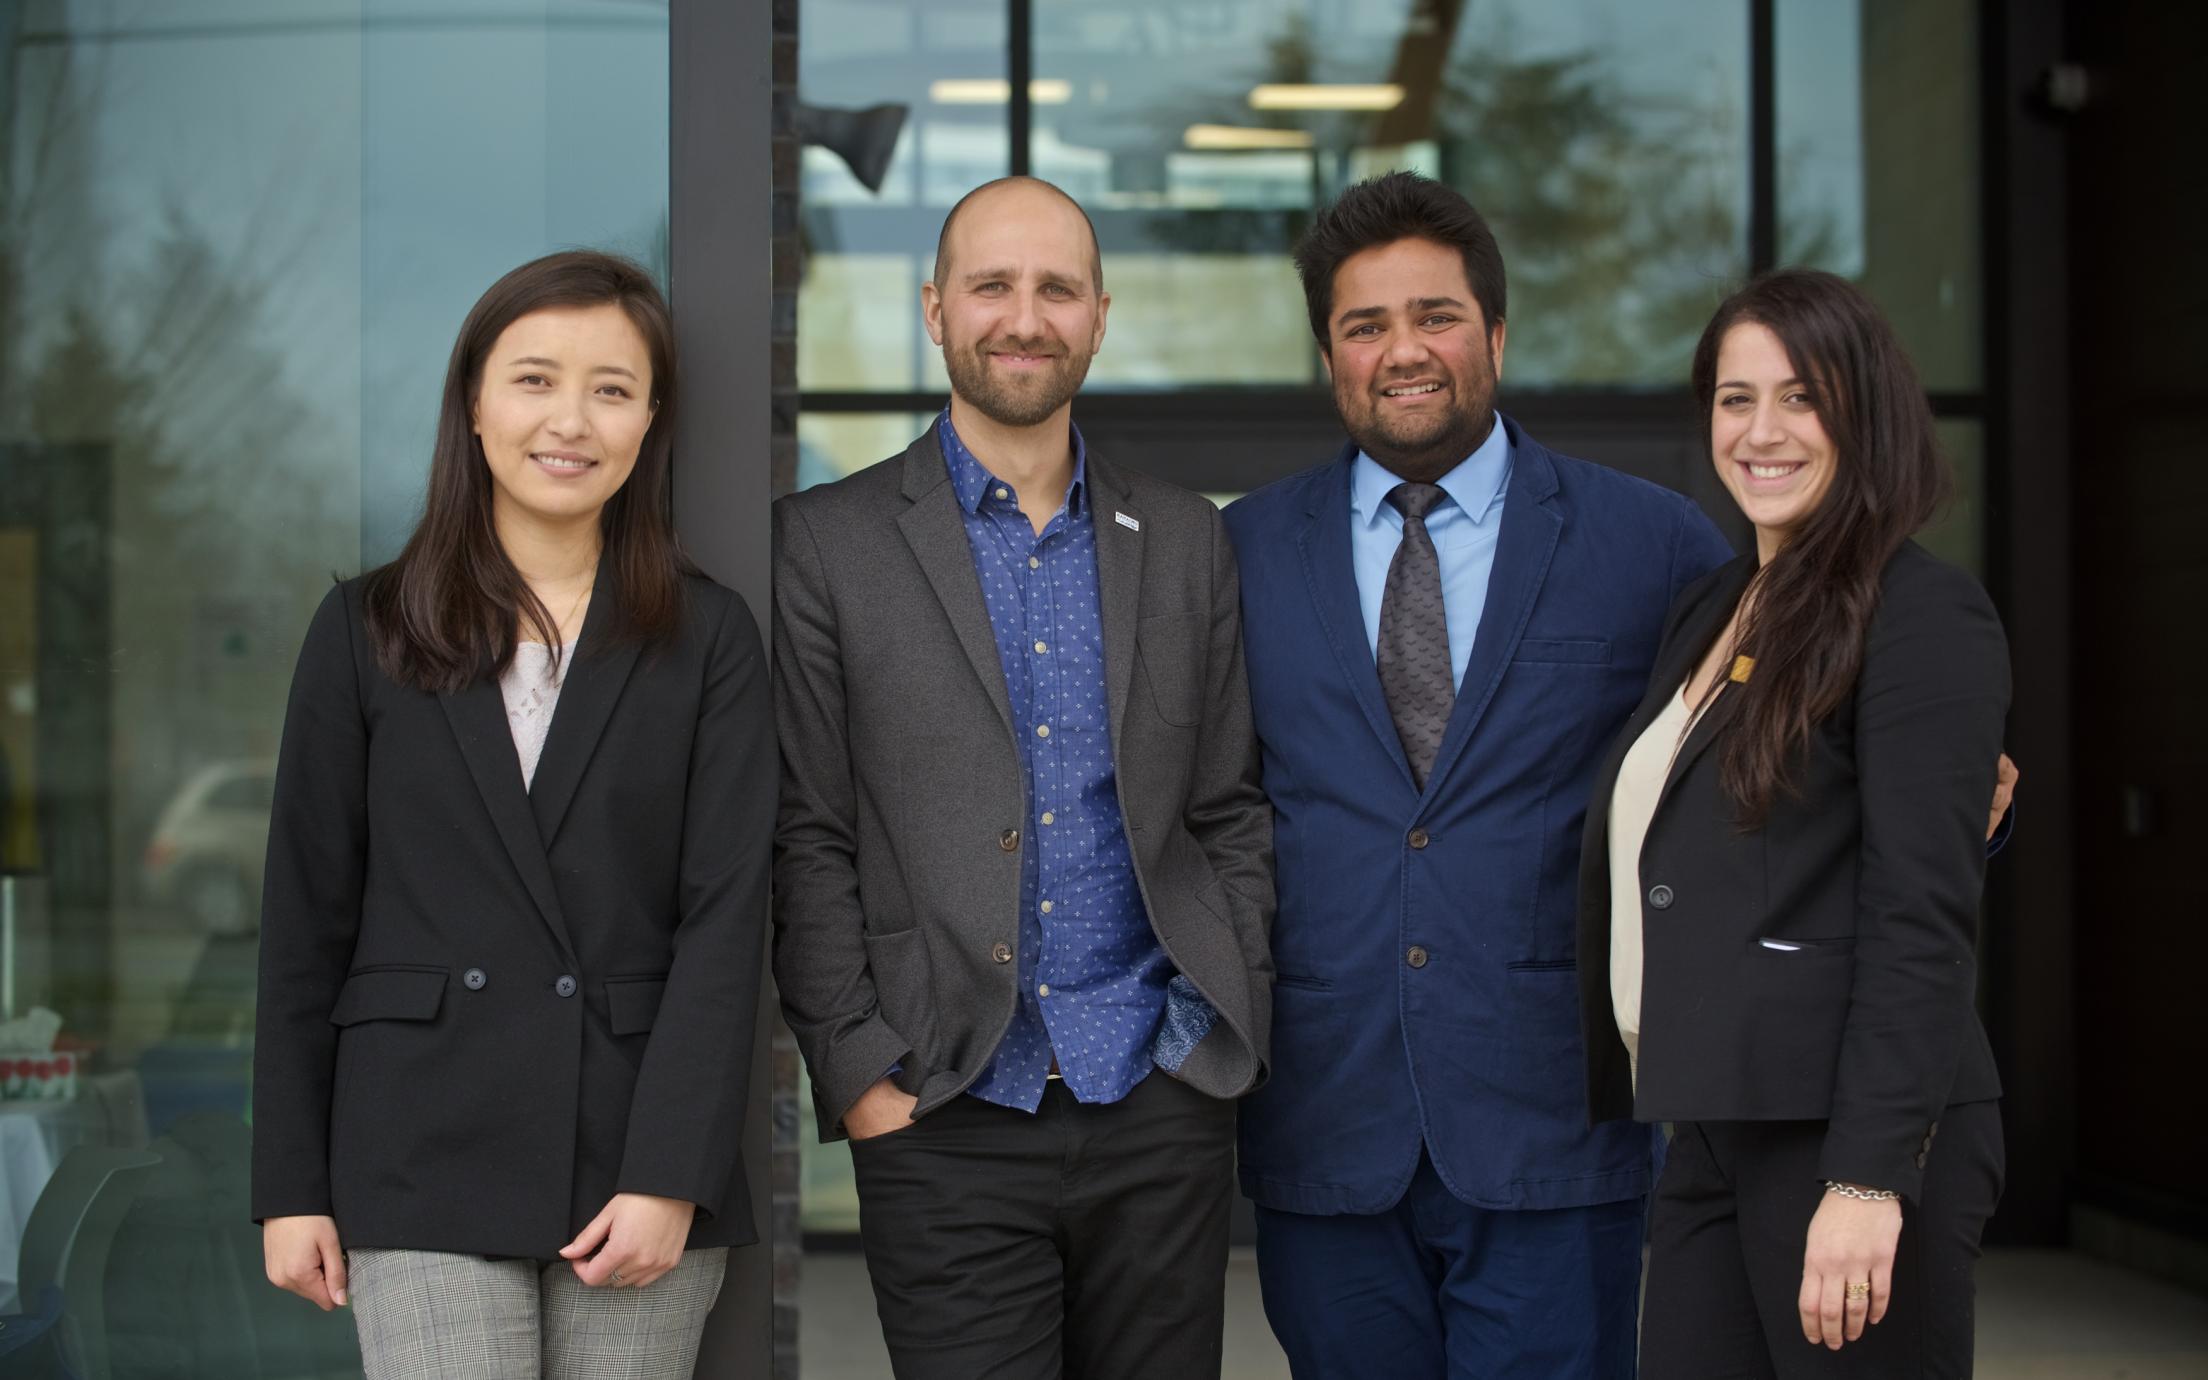 Four MBA students in business attire standing together for a photo